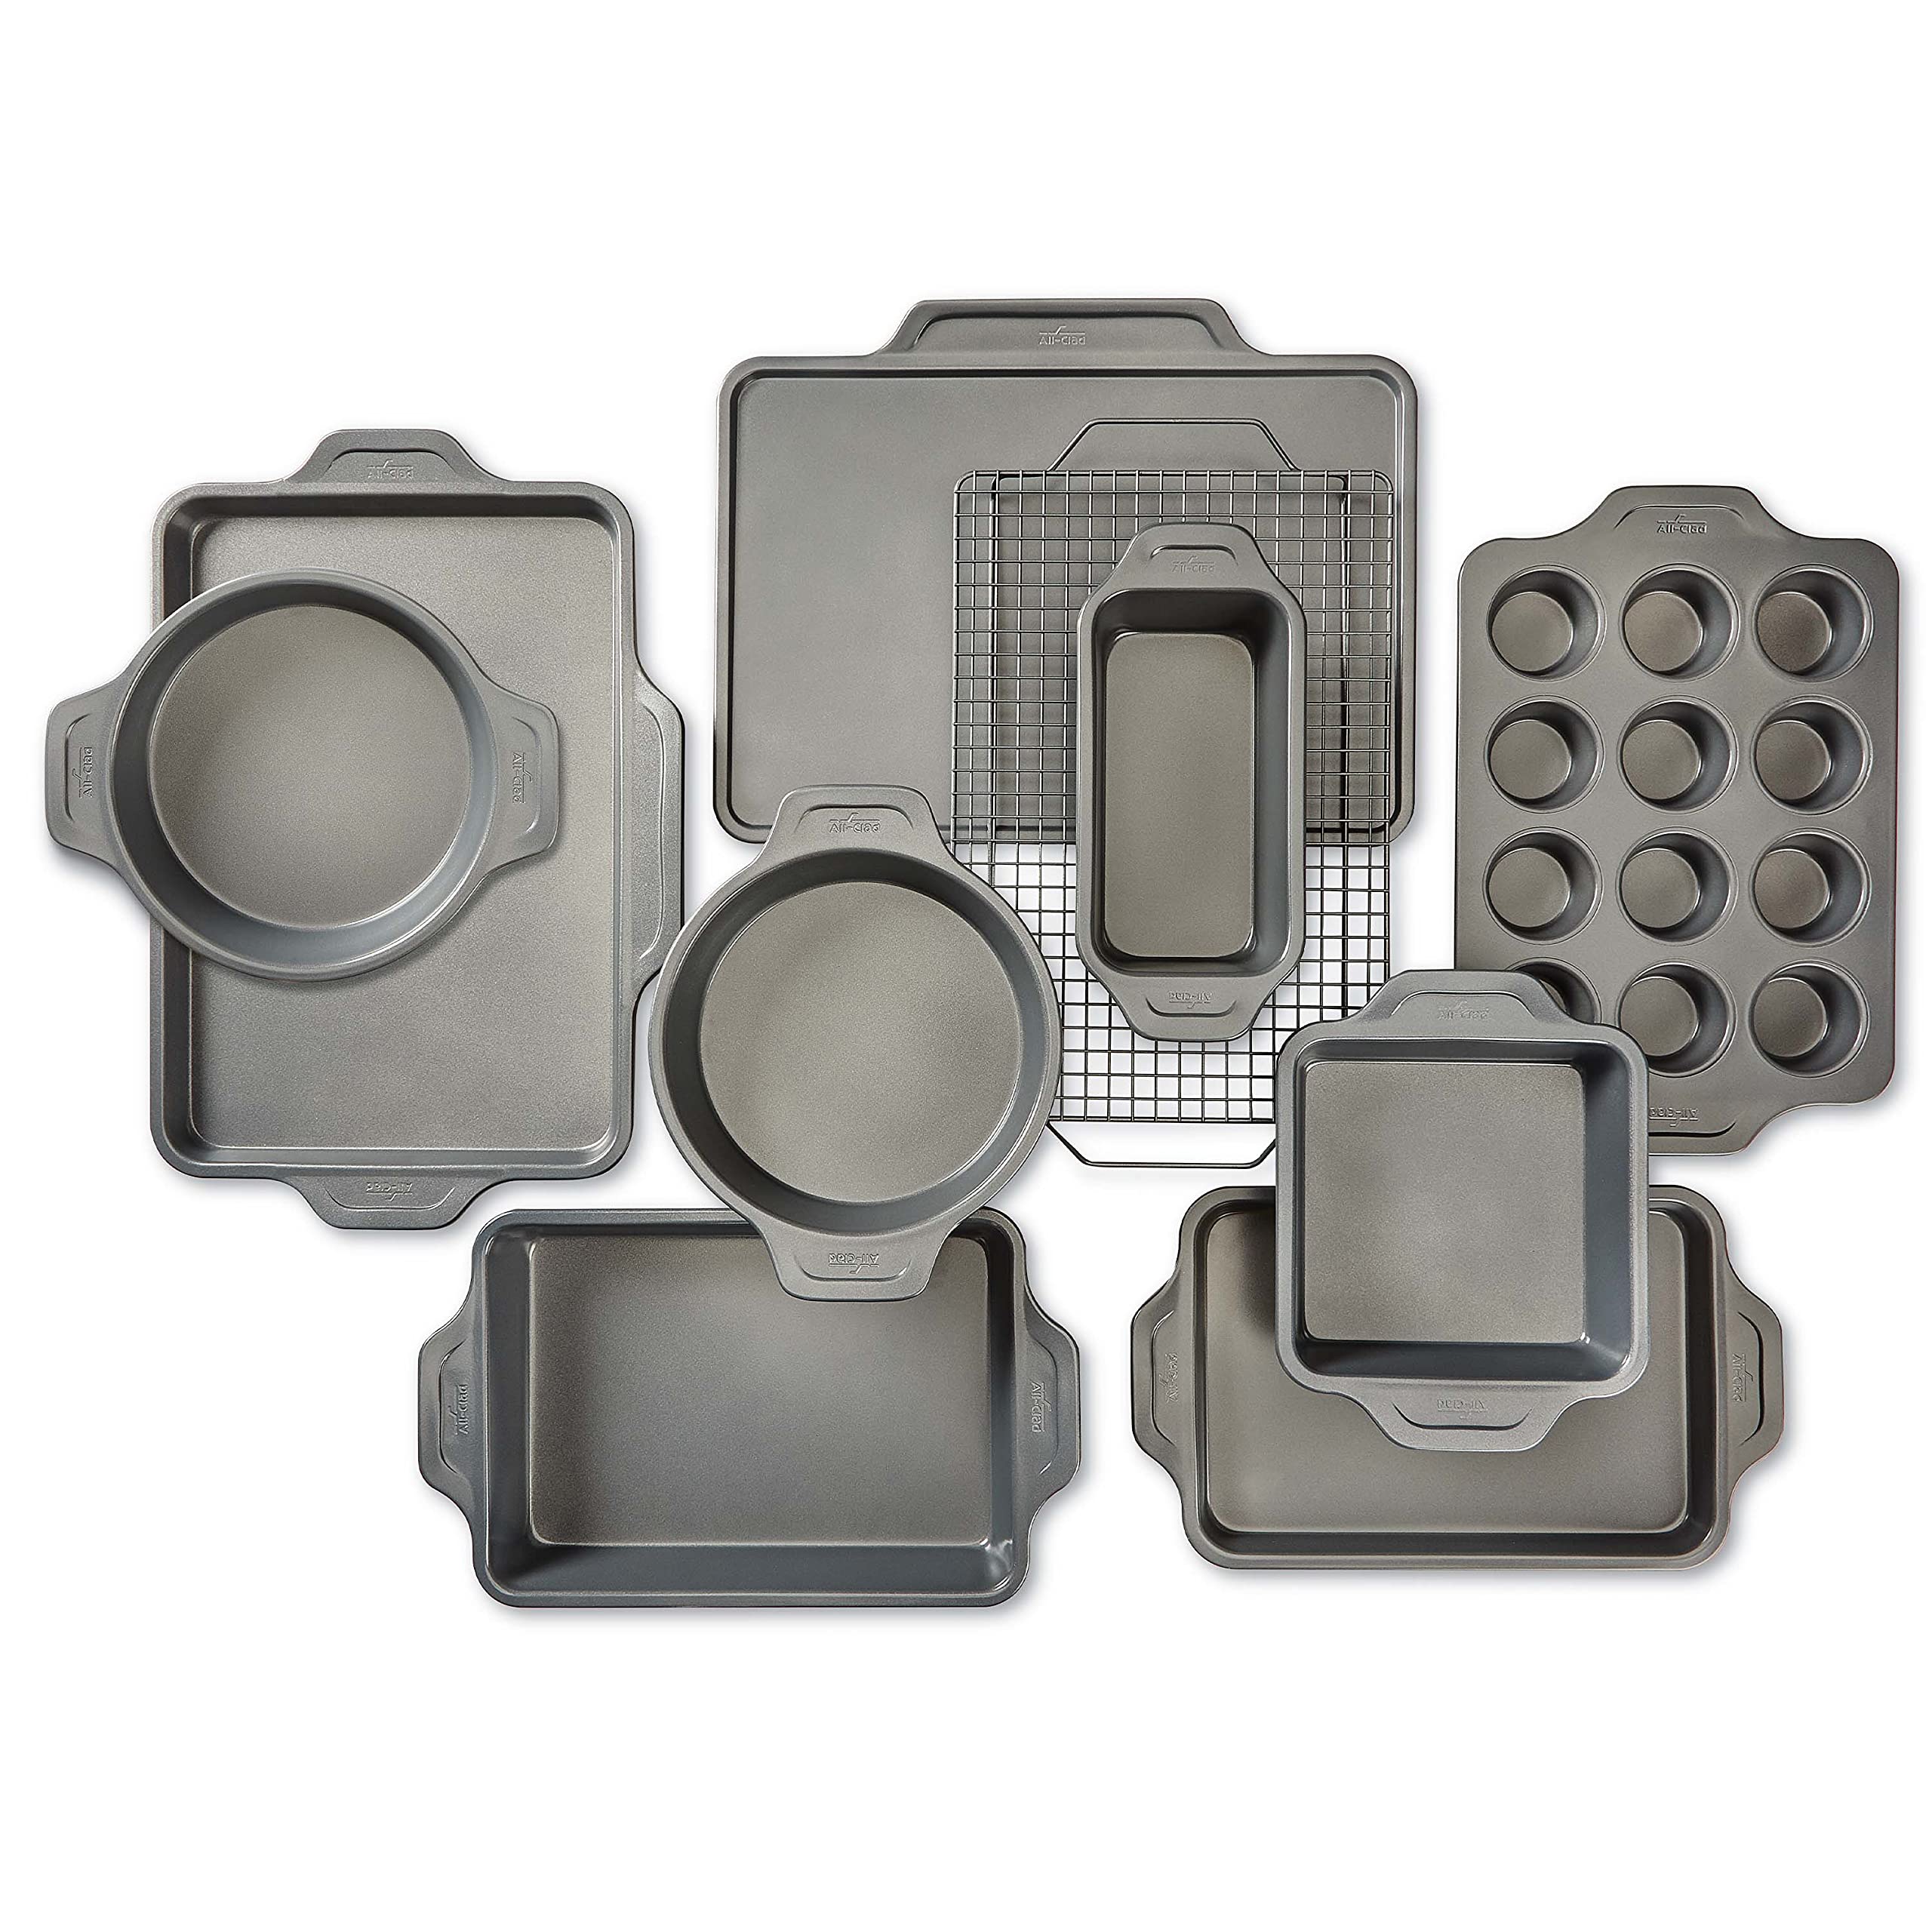 All-Clad Pro-Release Nonstick Bakeware Set 10 Piece Oven Broil Safe 450F Pots and Pans, Cookware Grey